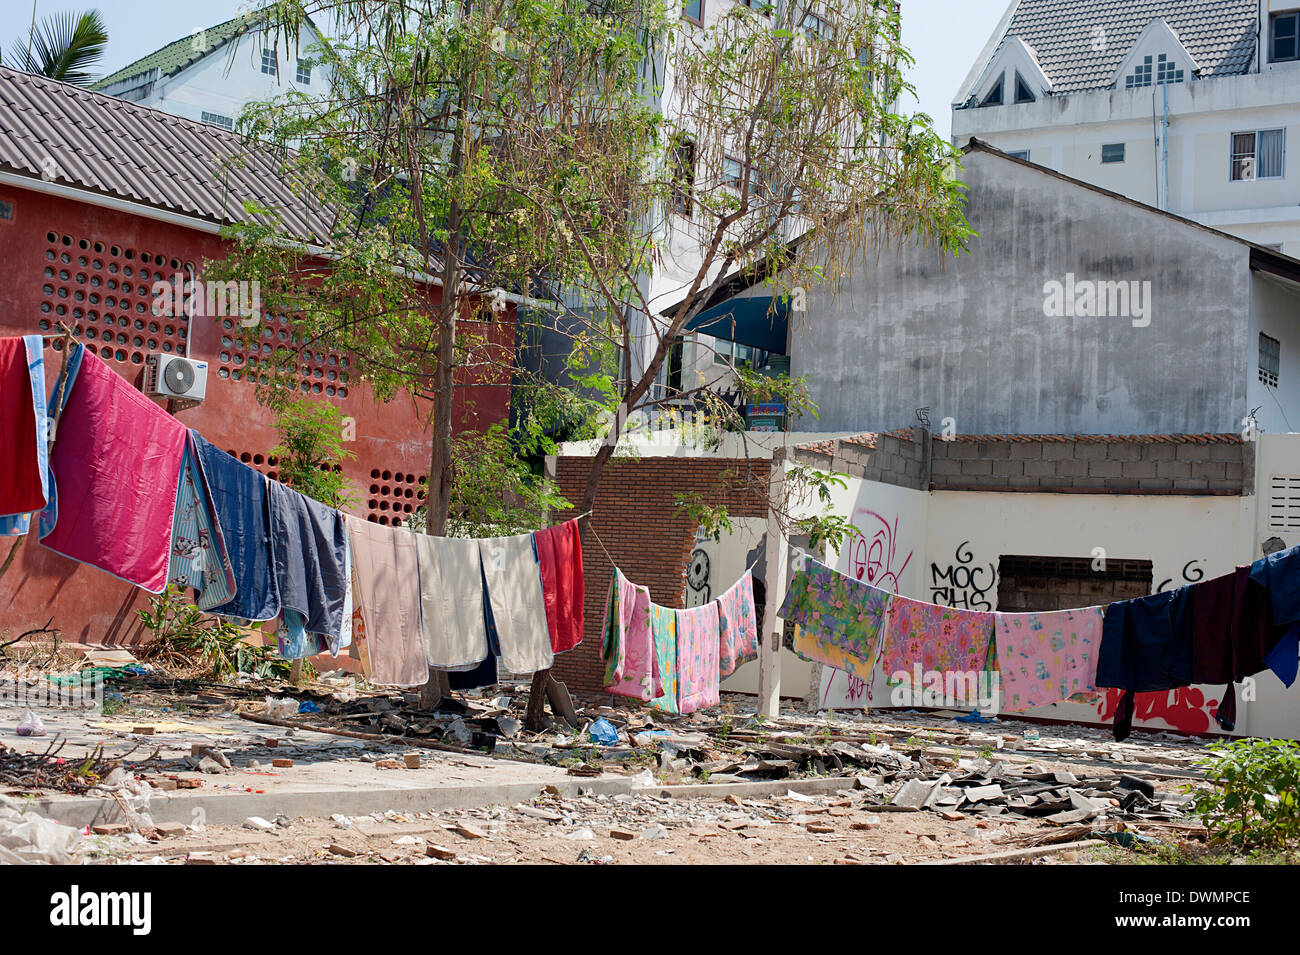 Washing hanging out to dry over derelict piece of land in Chiang Mai, Northern Thailand Stock Photo